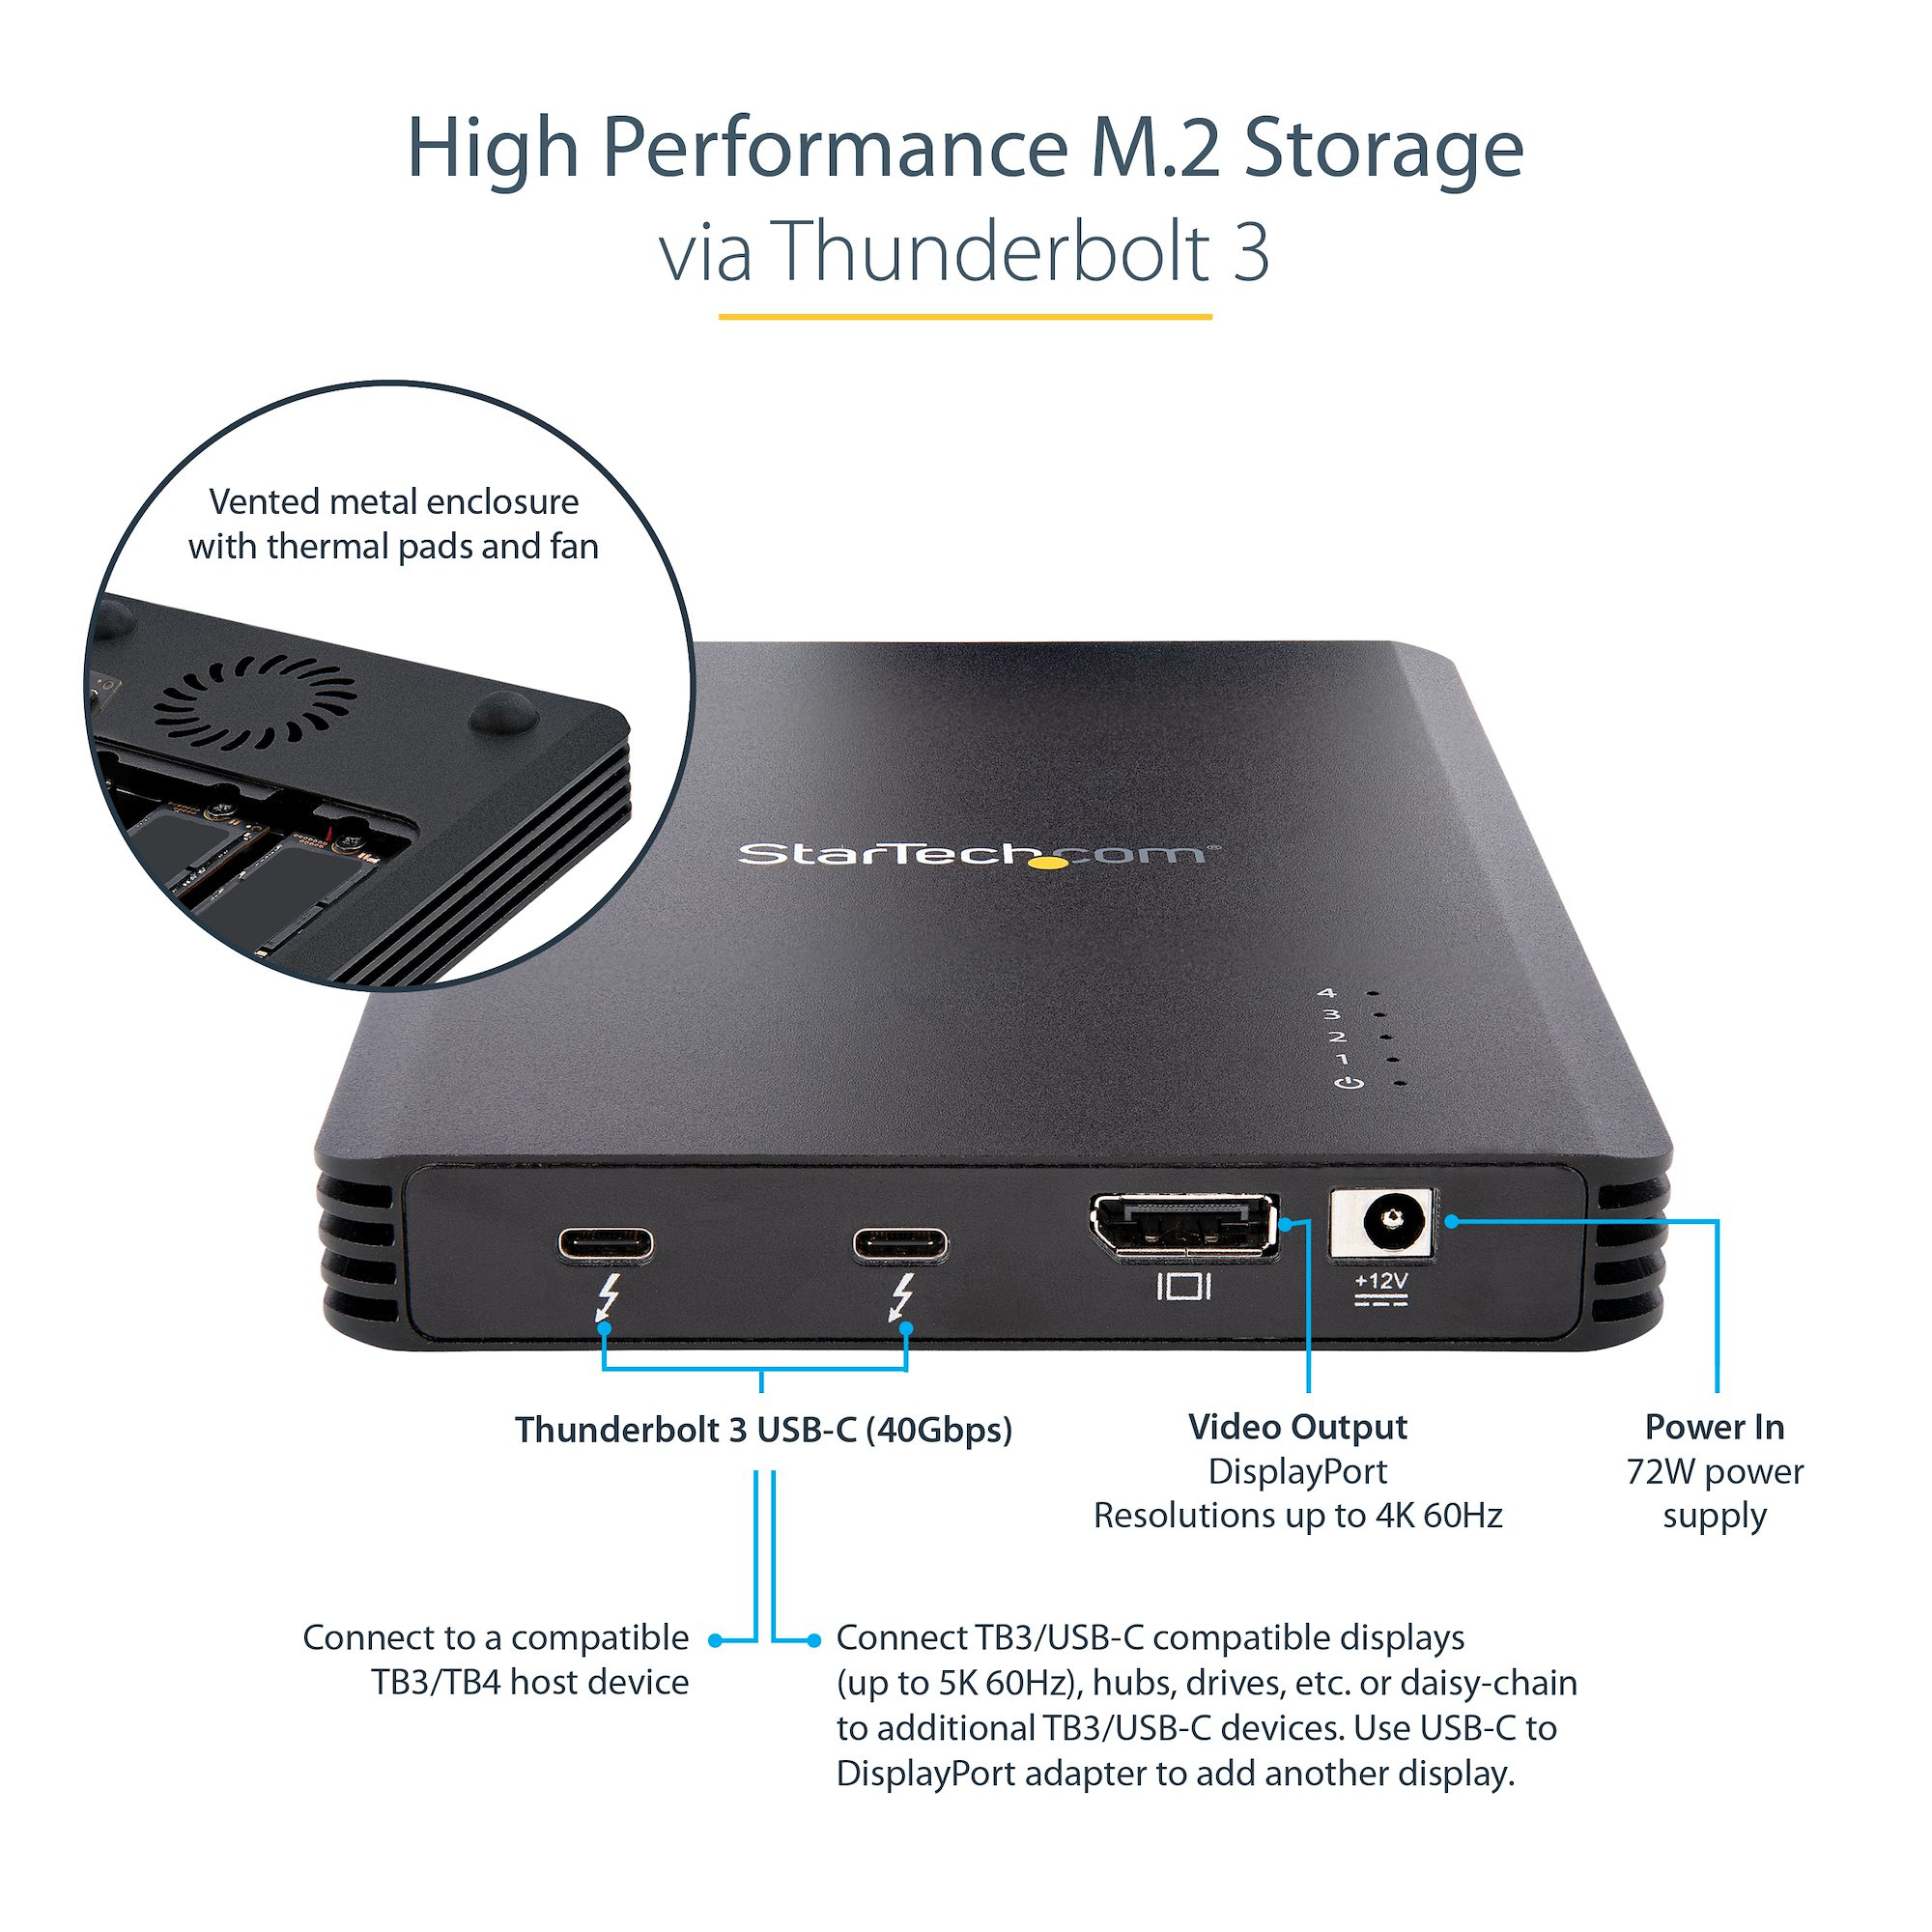 StarTech.com 4 Bay Thunderbolt 3 NVMe Enclosure, For M.2 NVMe SSD Drives, 1x DisplayPort Video/ 2x TB3 Downstream Ports, 40Gbps, 72W Power Supply, External Hard Drive Enclosure